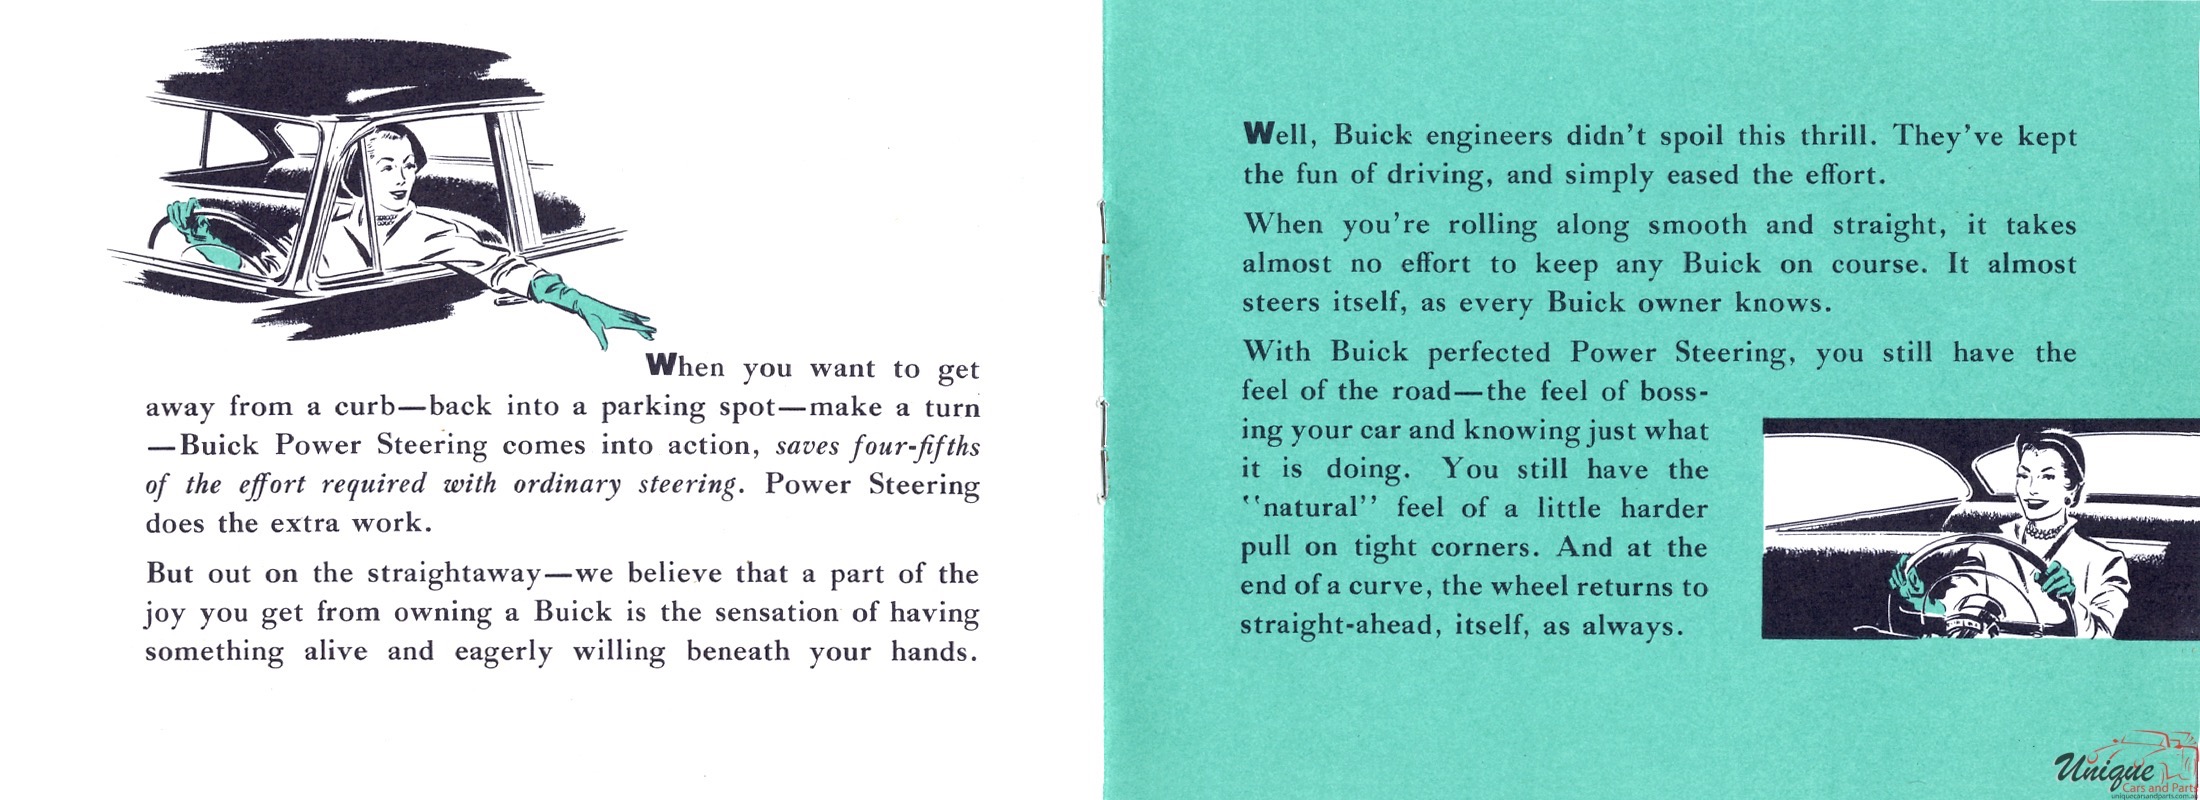 1952 Buick Power Steering Folder Page 4